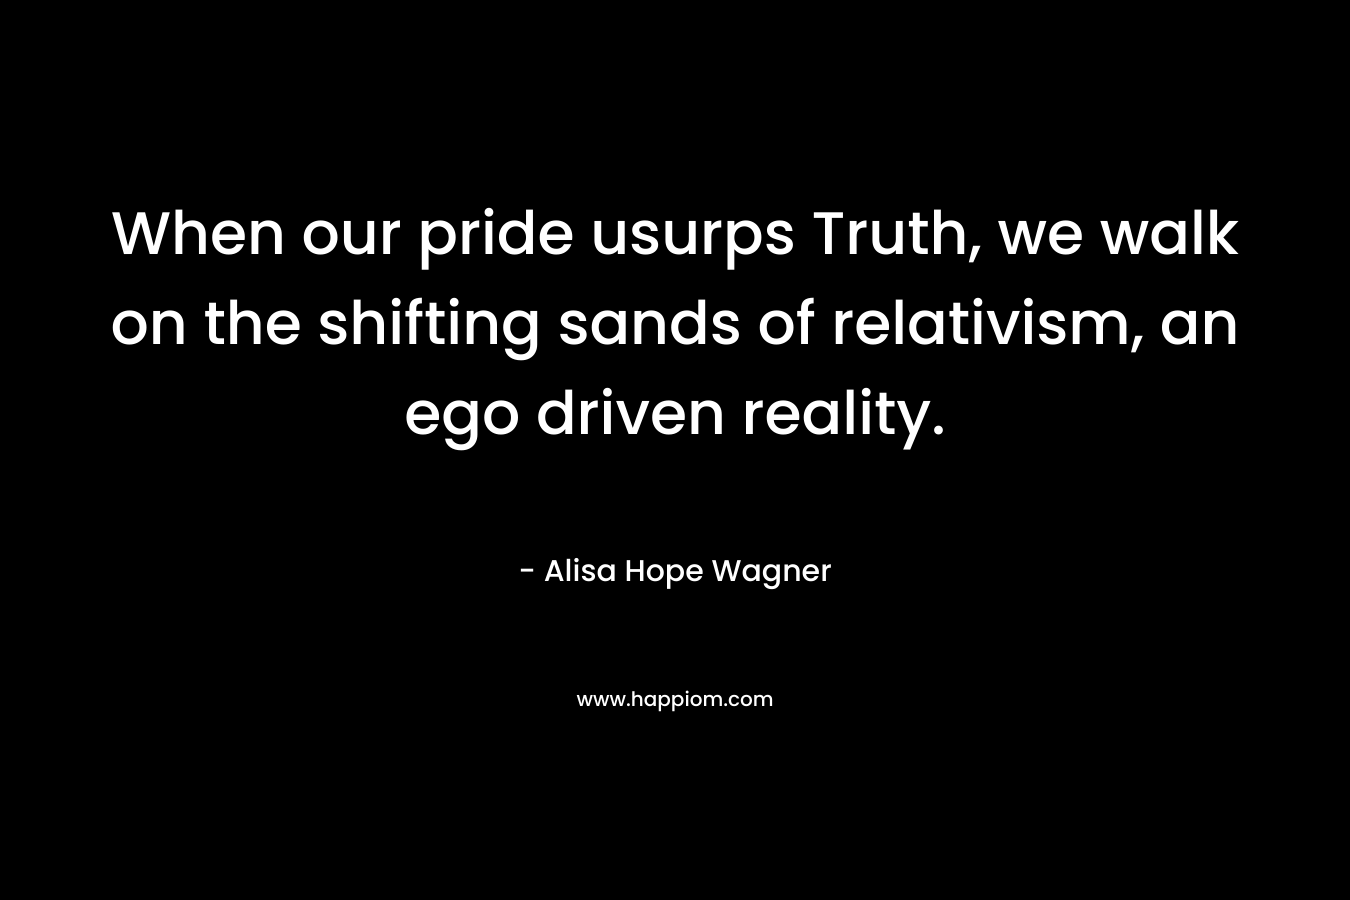 When our pride usurps Truth, we walk on the shifting sands of relativism, an ego driven reality. – Alisa Hope Wagner